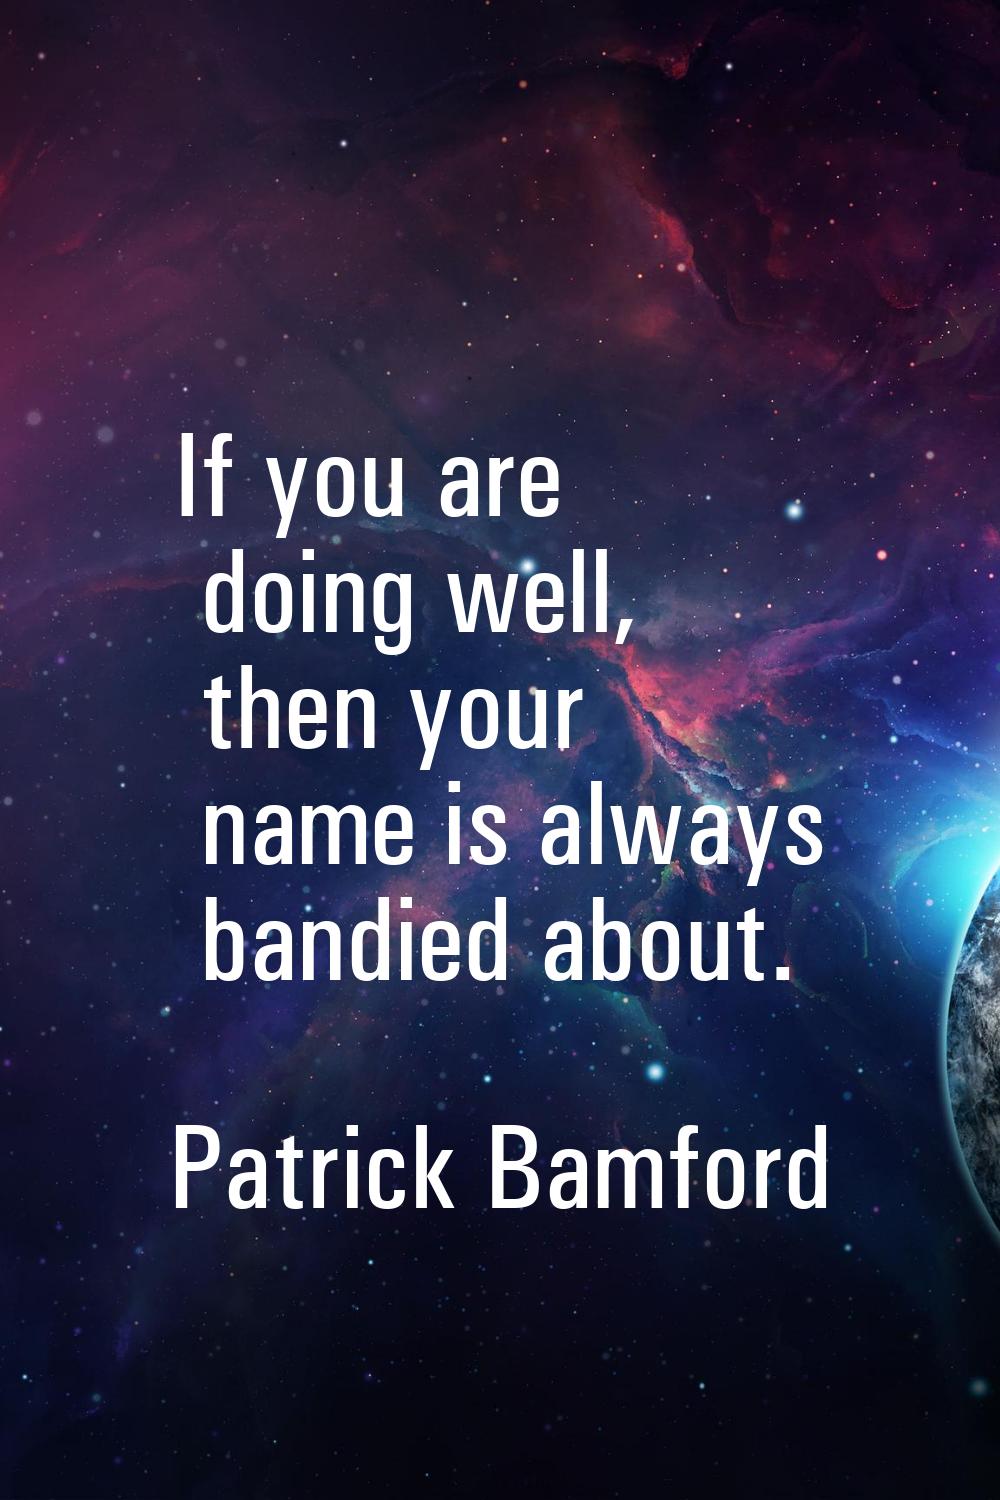 If you are doing well, then your name is always bandied about.